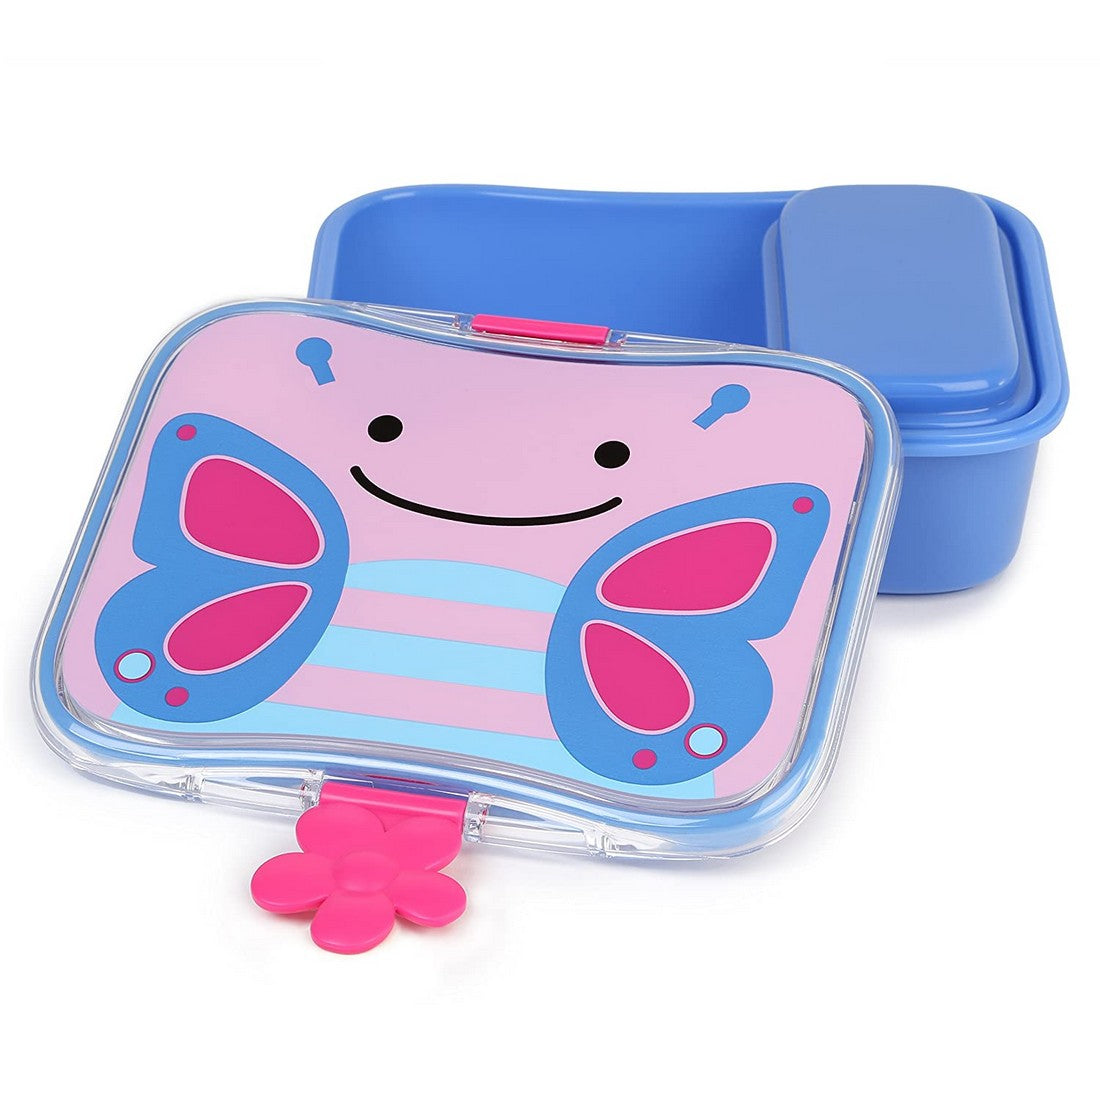 Skip Hop Zoo Lunch Kit Lunch Box Butterfly 3Y to 6Y